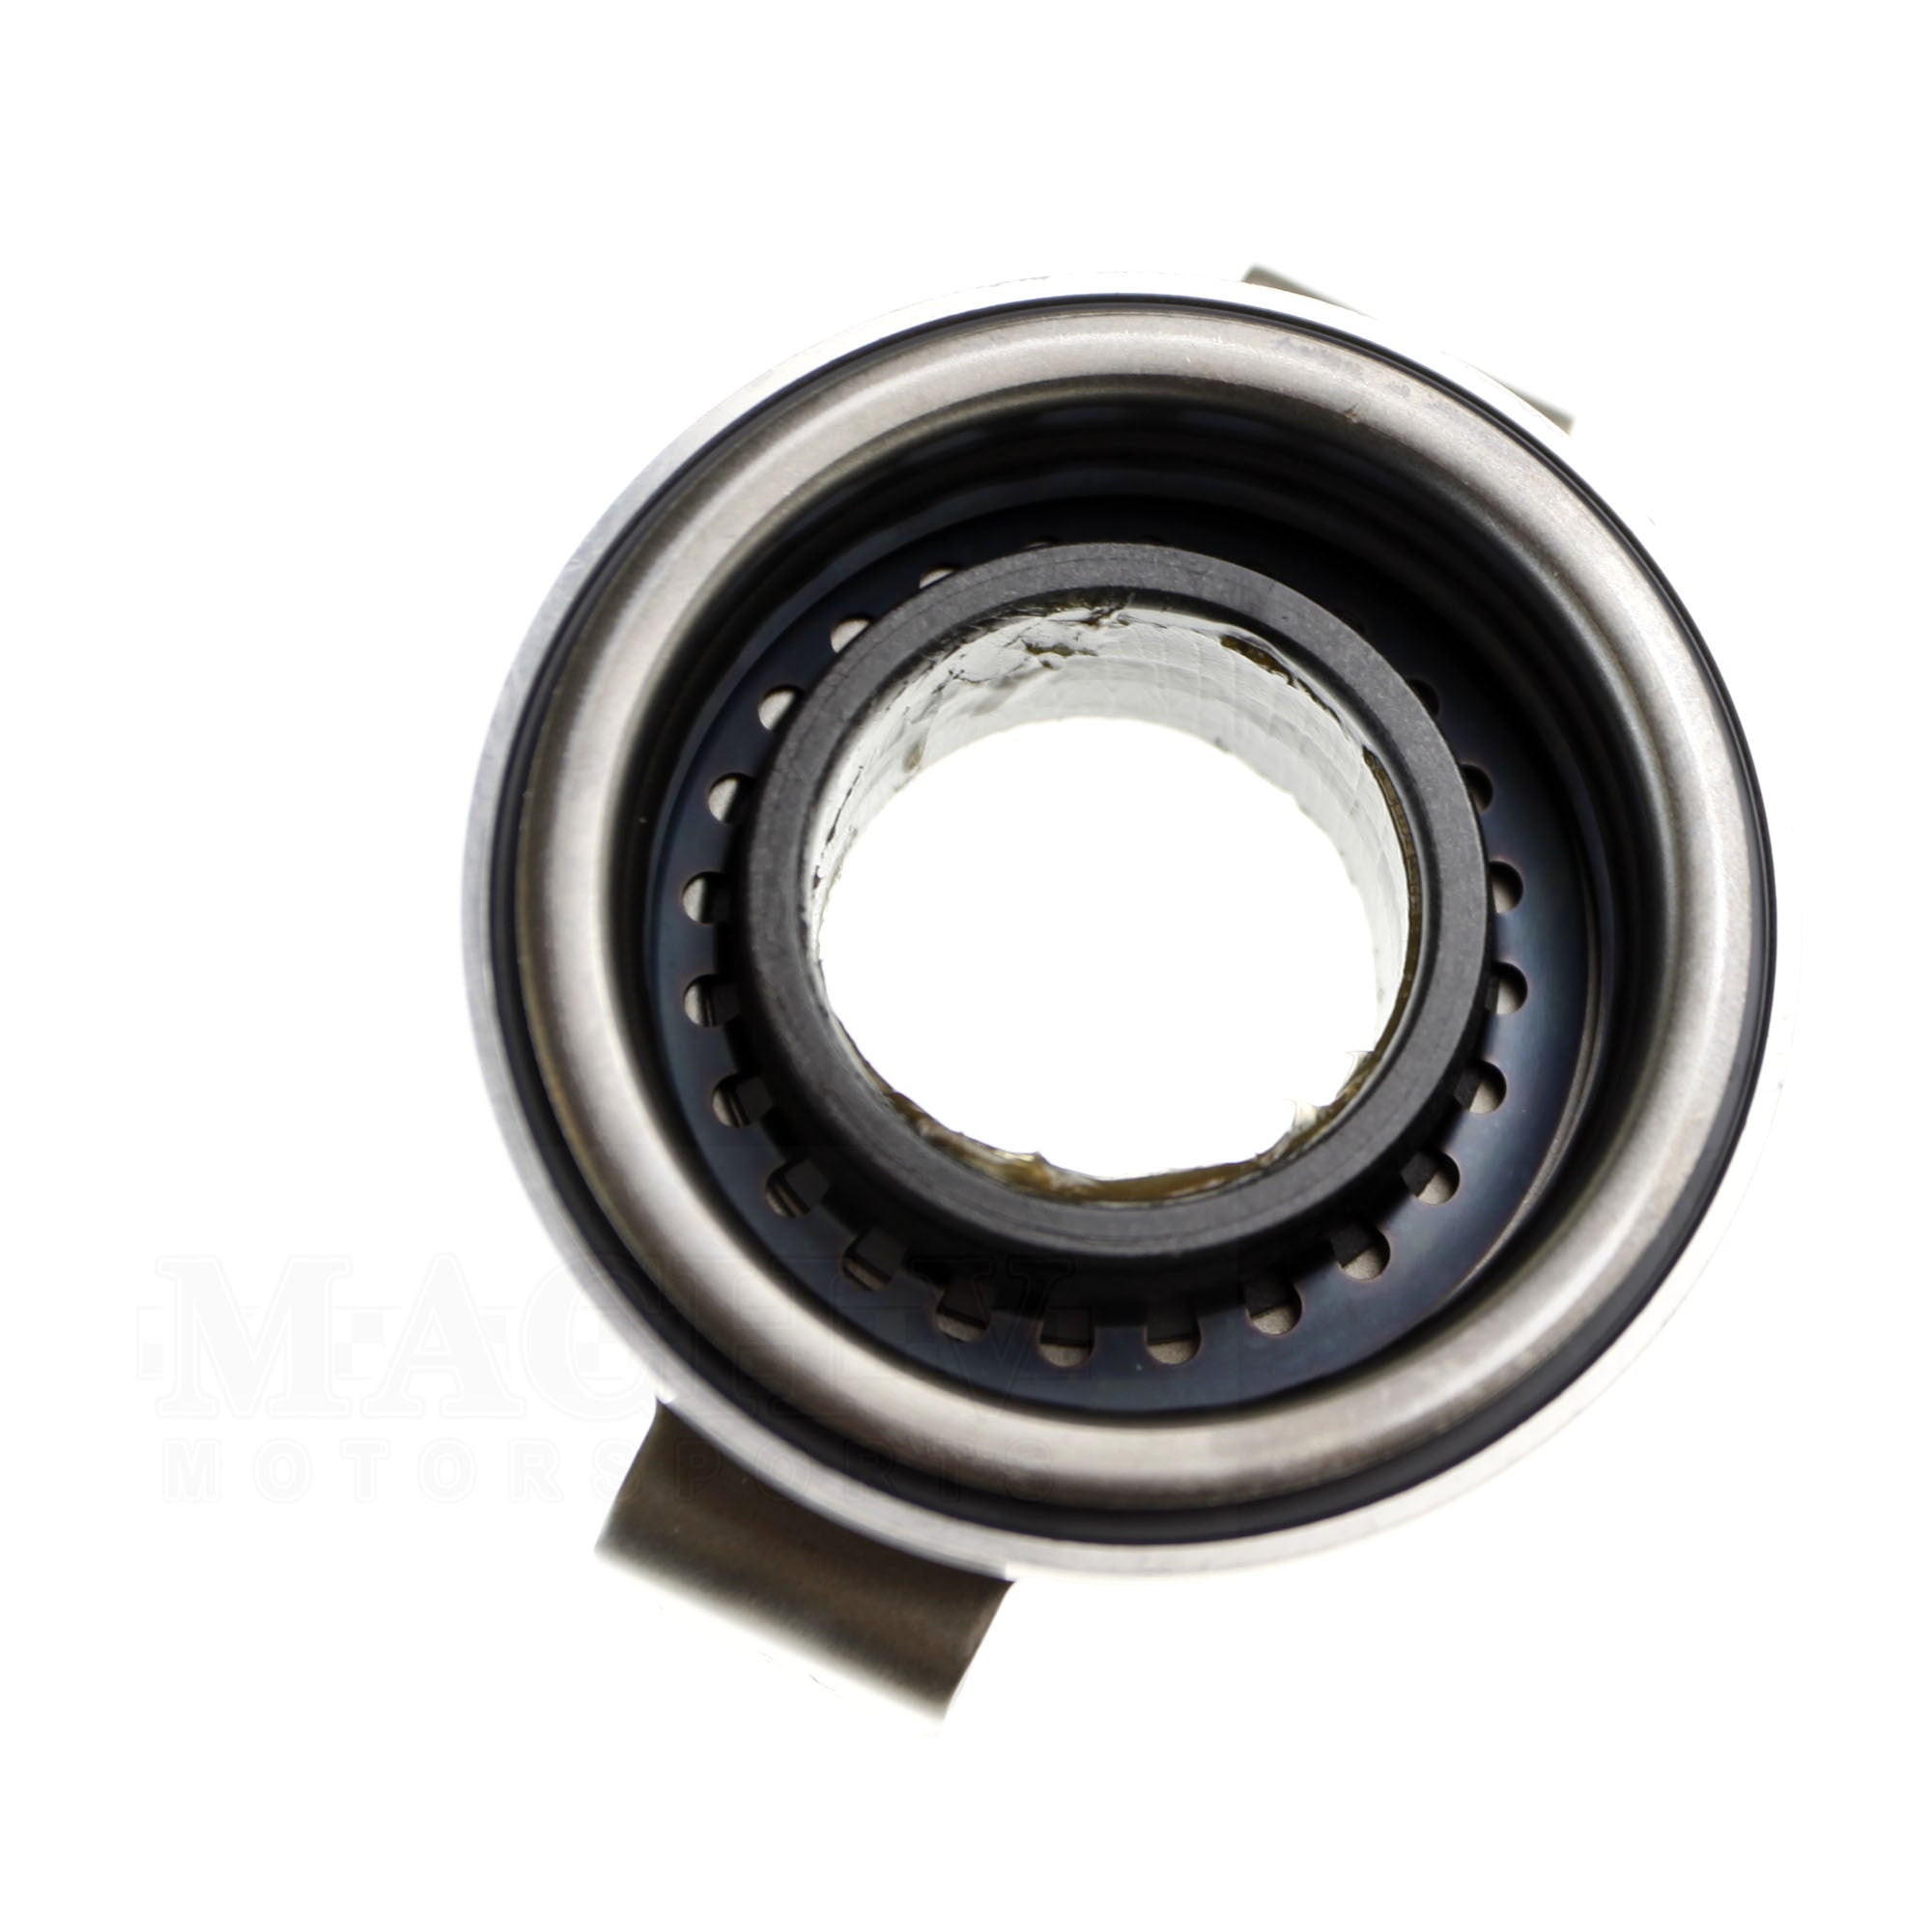 Subaru Throw-Out Bearing 2006-2021 WRX, 2003-2013 Forester XT, 2005-2009 Legacy GT